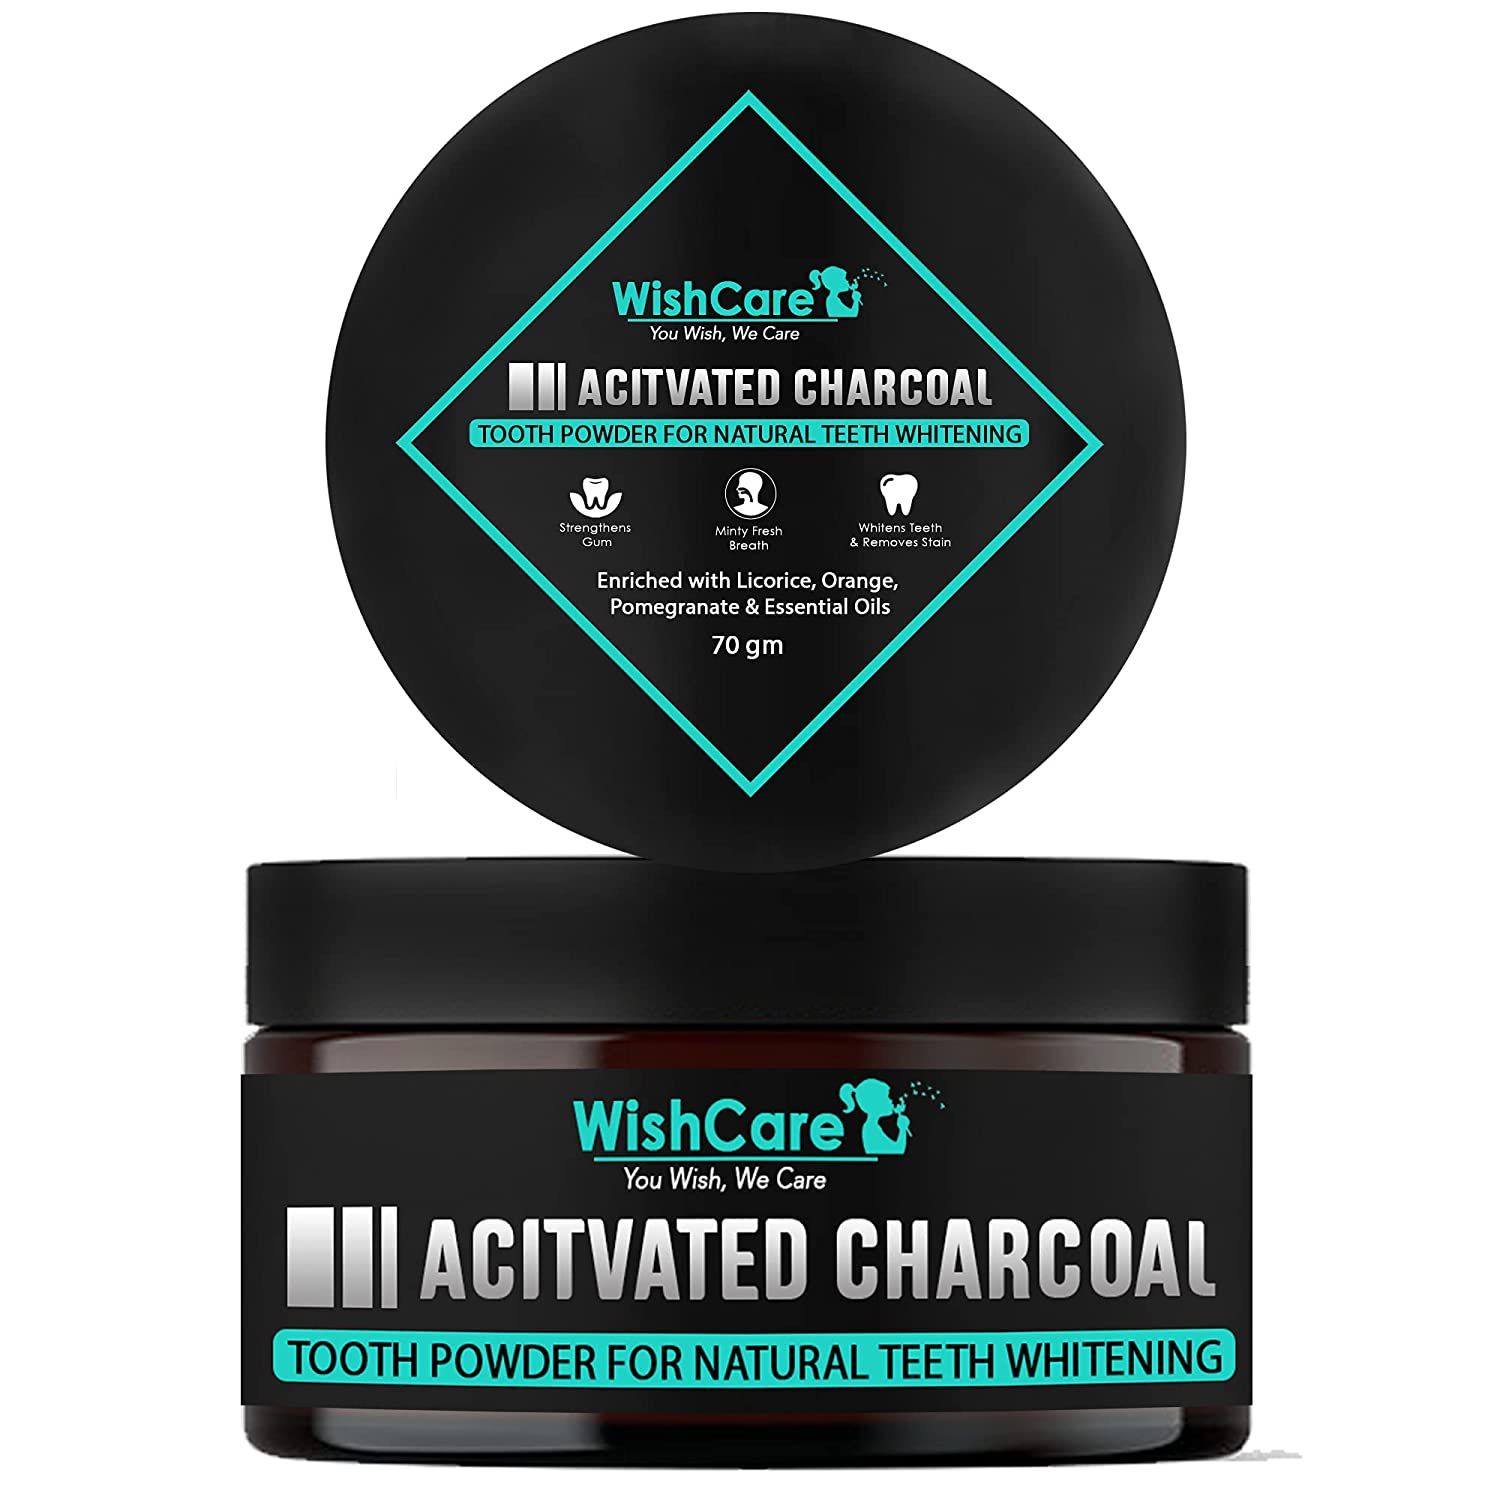 Wishcare Activated Charcoal Tooth Powder for Natural Teeth Whitening